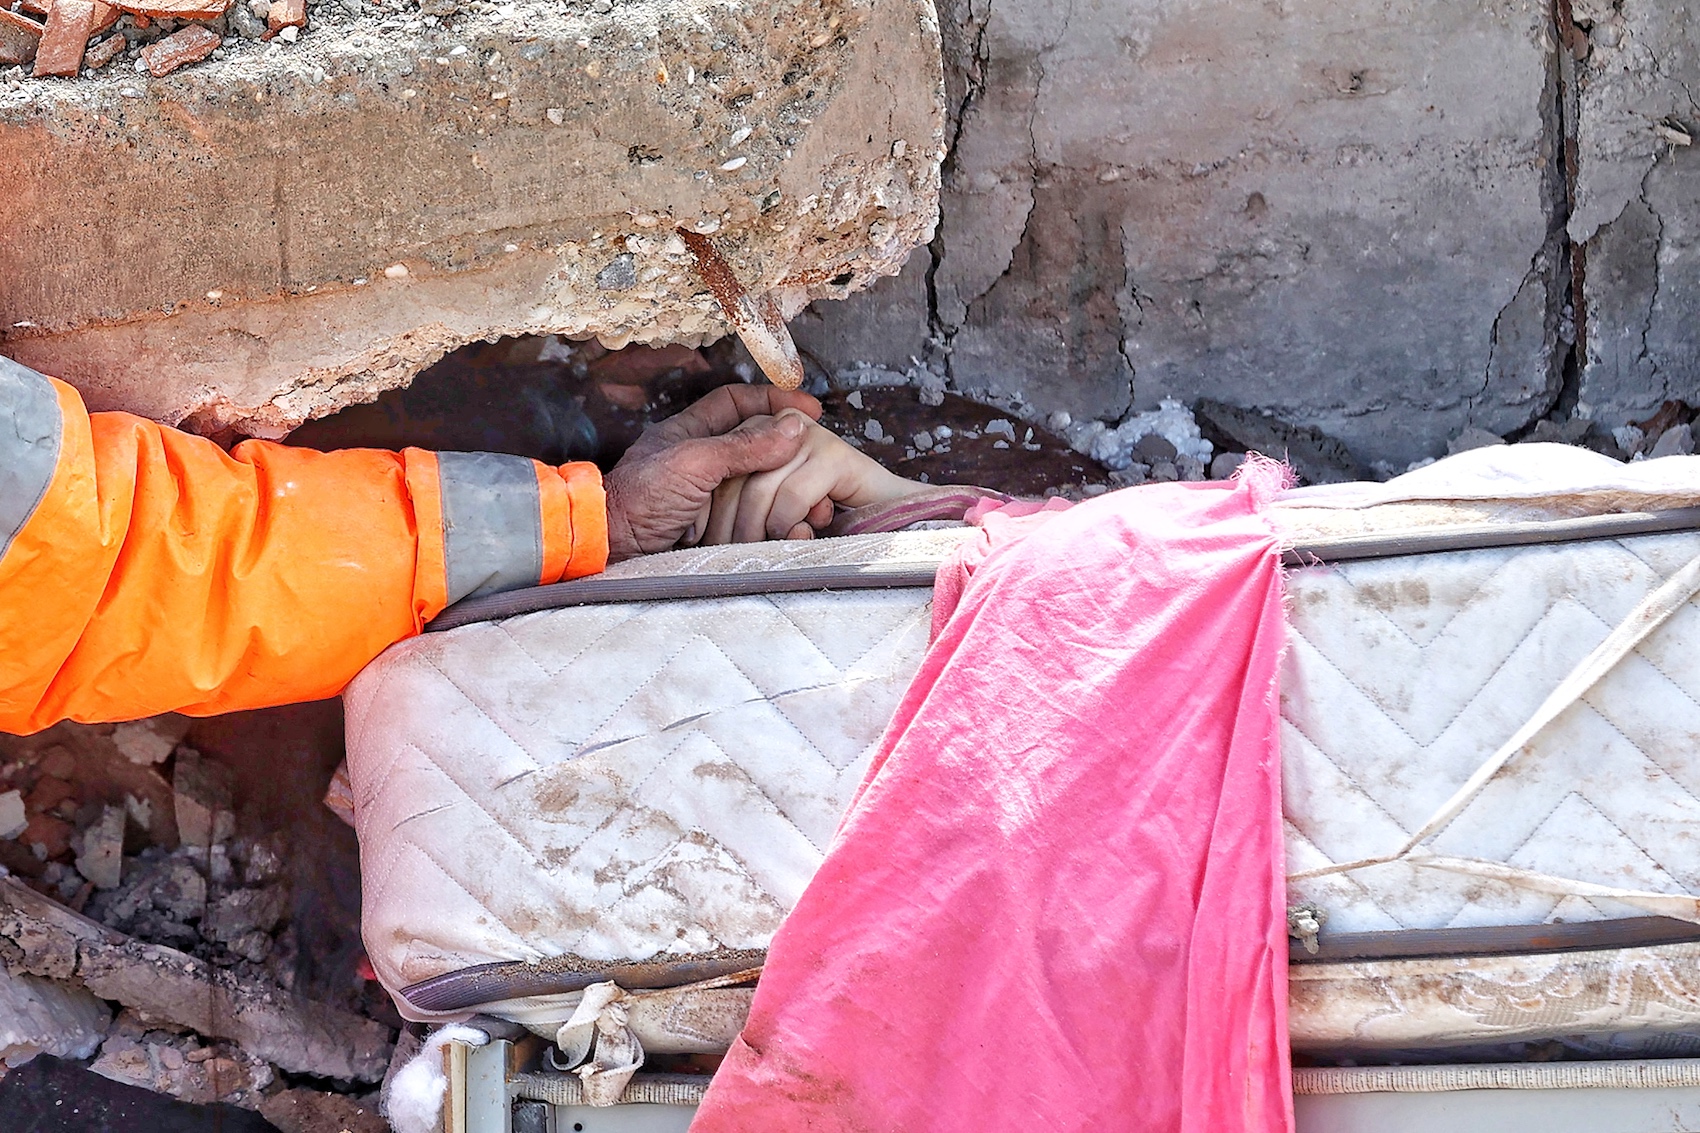 A Turkish Dad Refused To Let Go Of His Dead Daughter’s Hand Buried Below Rubble And It’s Heartbreaking